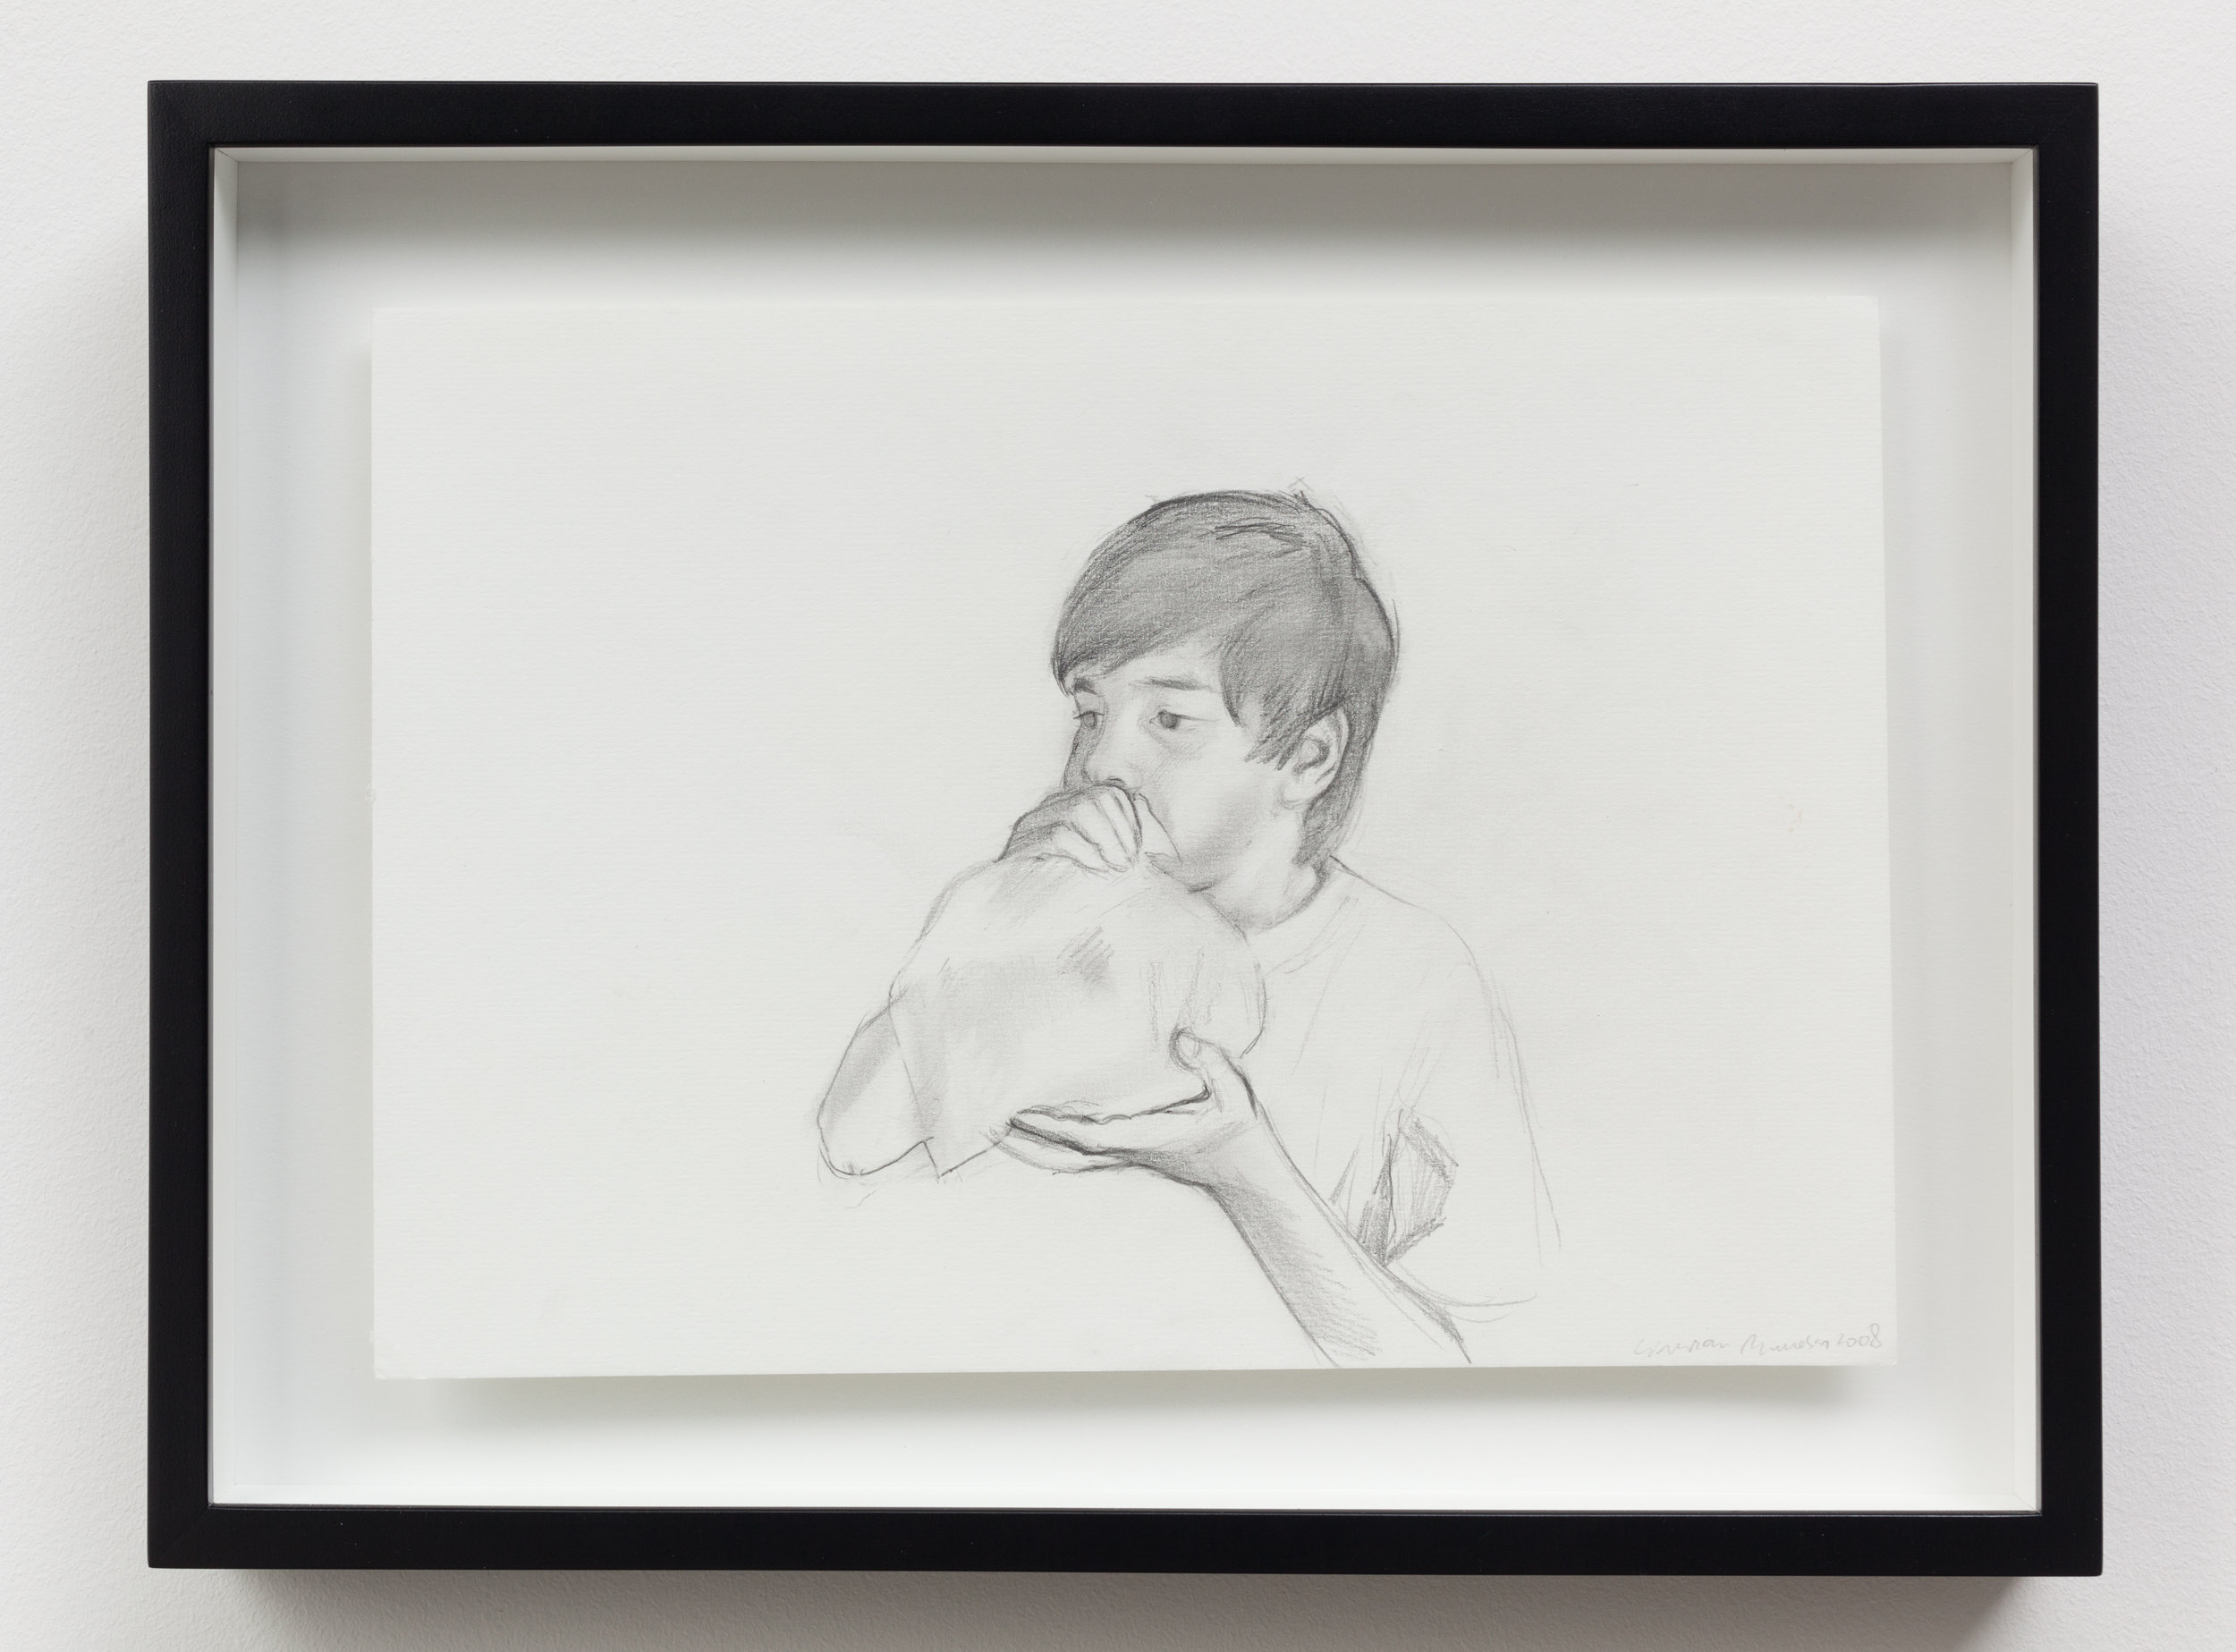  "Untitled (Pioneers)" (2008)  Graphite on paper  8 x 11.5 in each 